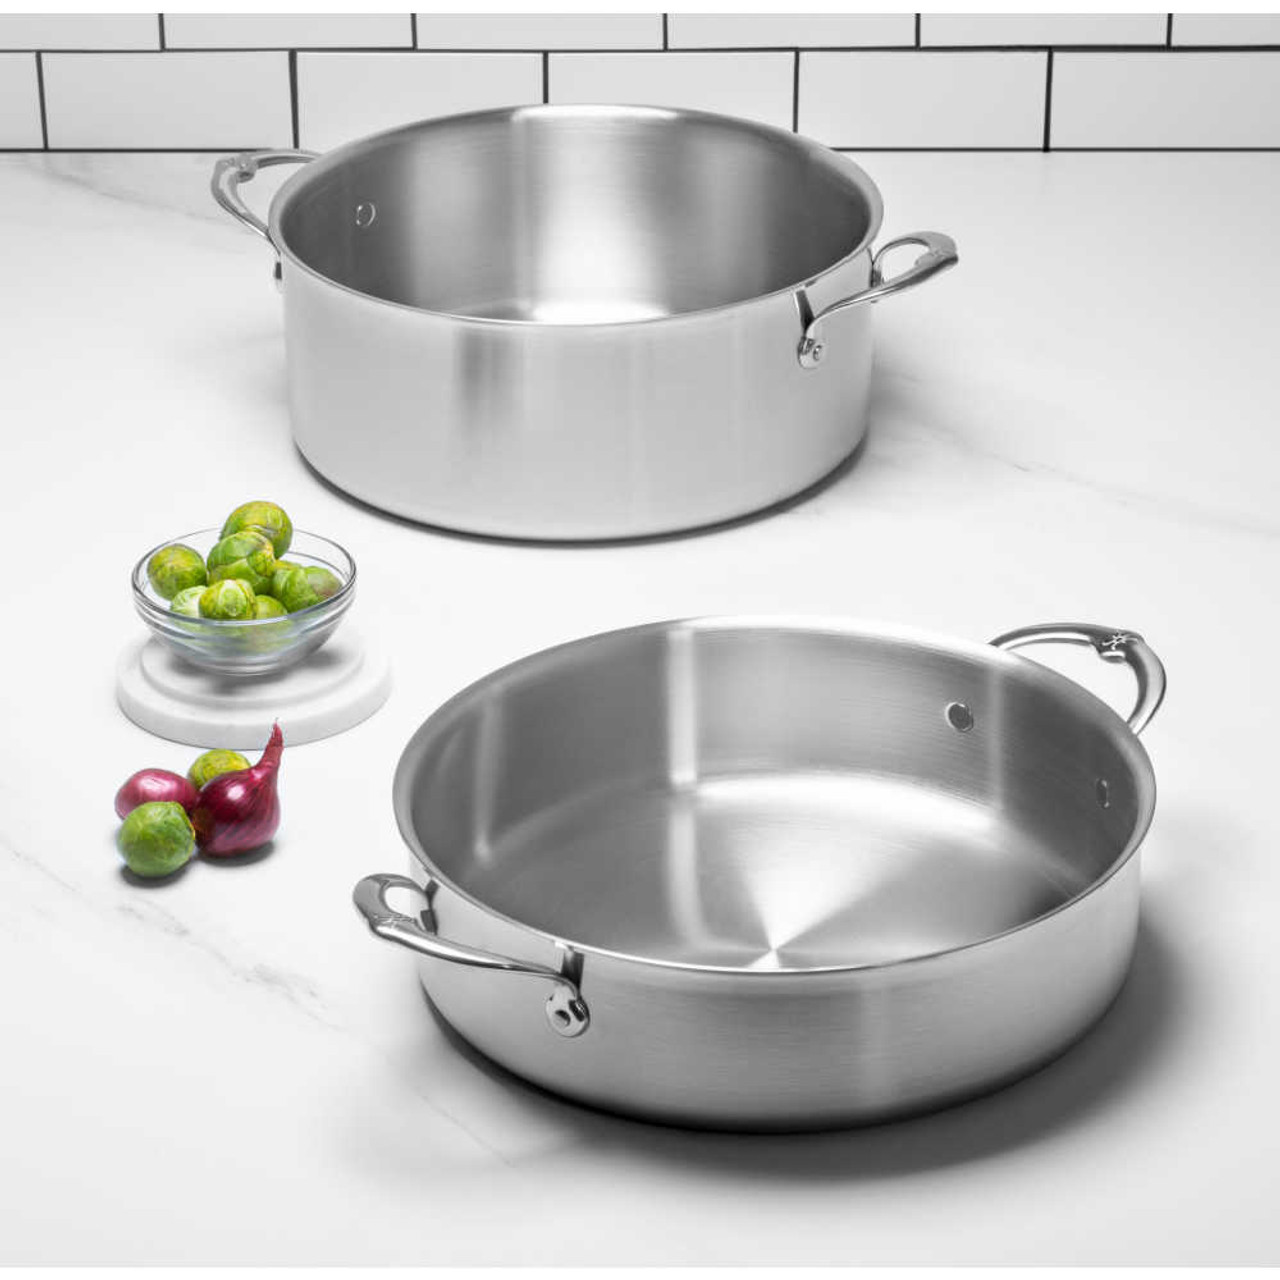 Thomas Keller Insignia by Hestan - Stainless Steel Stock Pot, Induction  Cooktop Compatible, 8 Quart